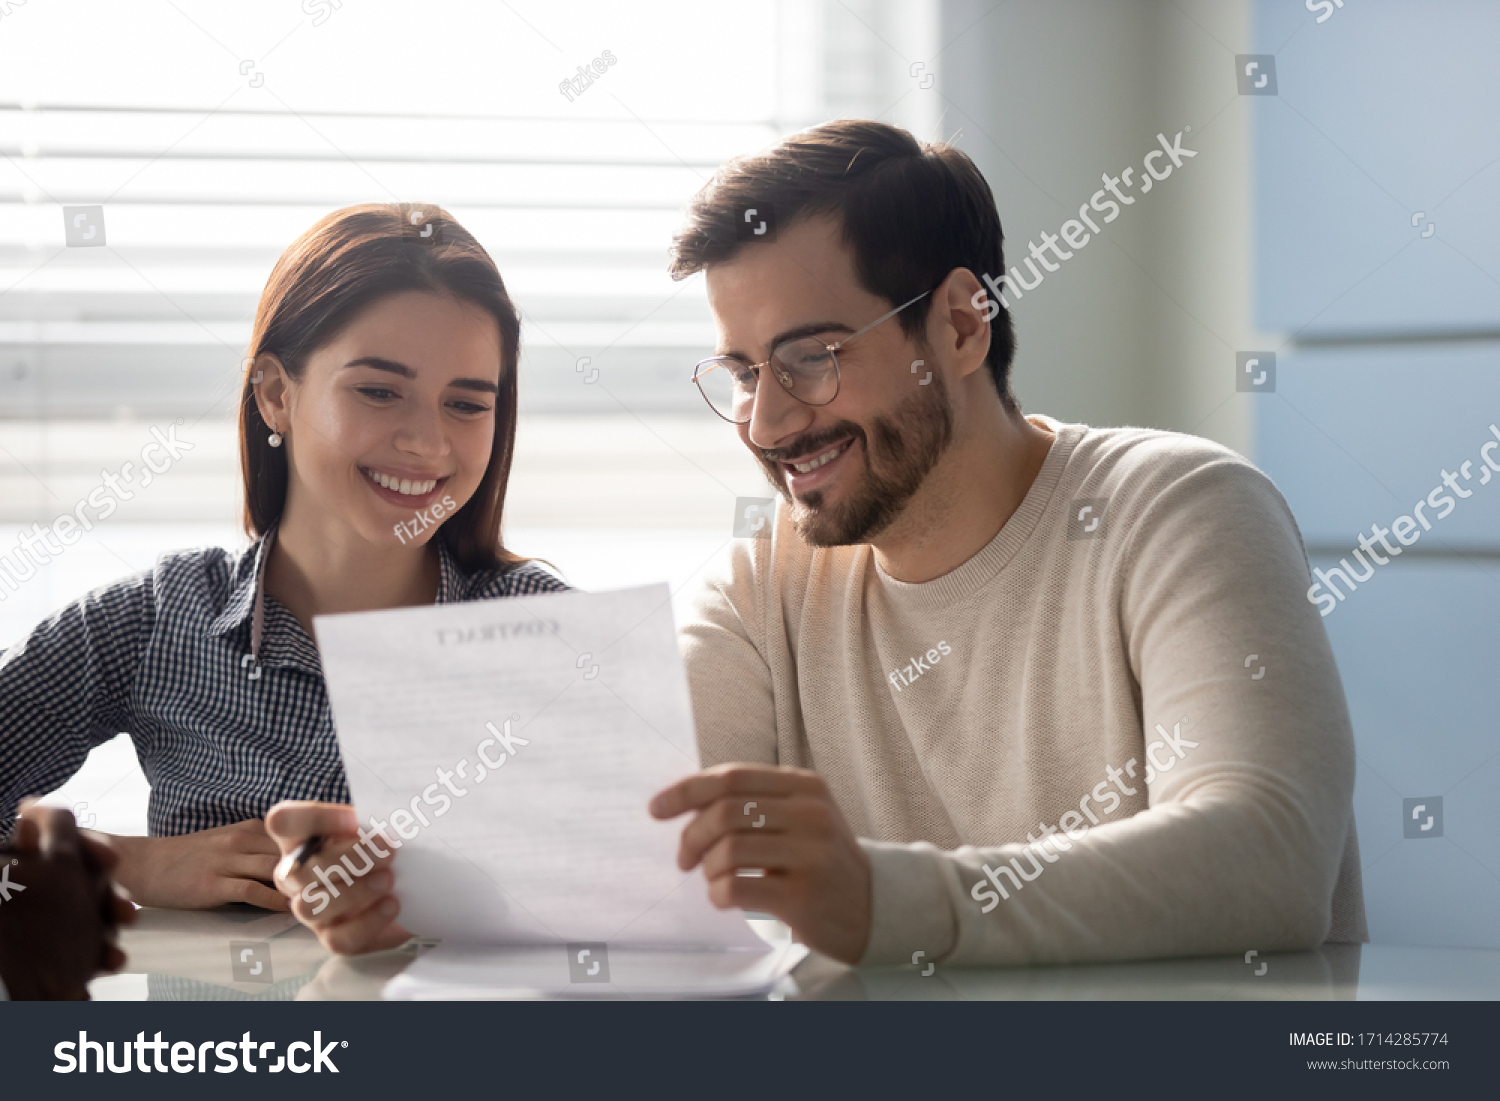 Young successful couple, man and woman reading business document at mortgage negotiating. Happy smiling husband in glasses and wife making deal together in broker office. #1714285774